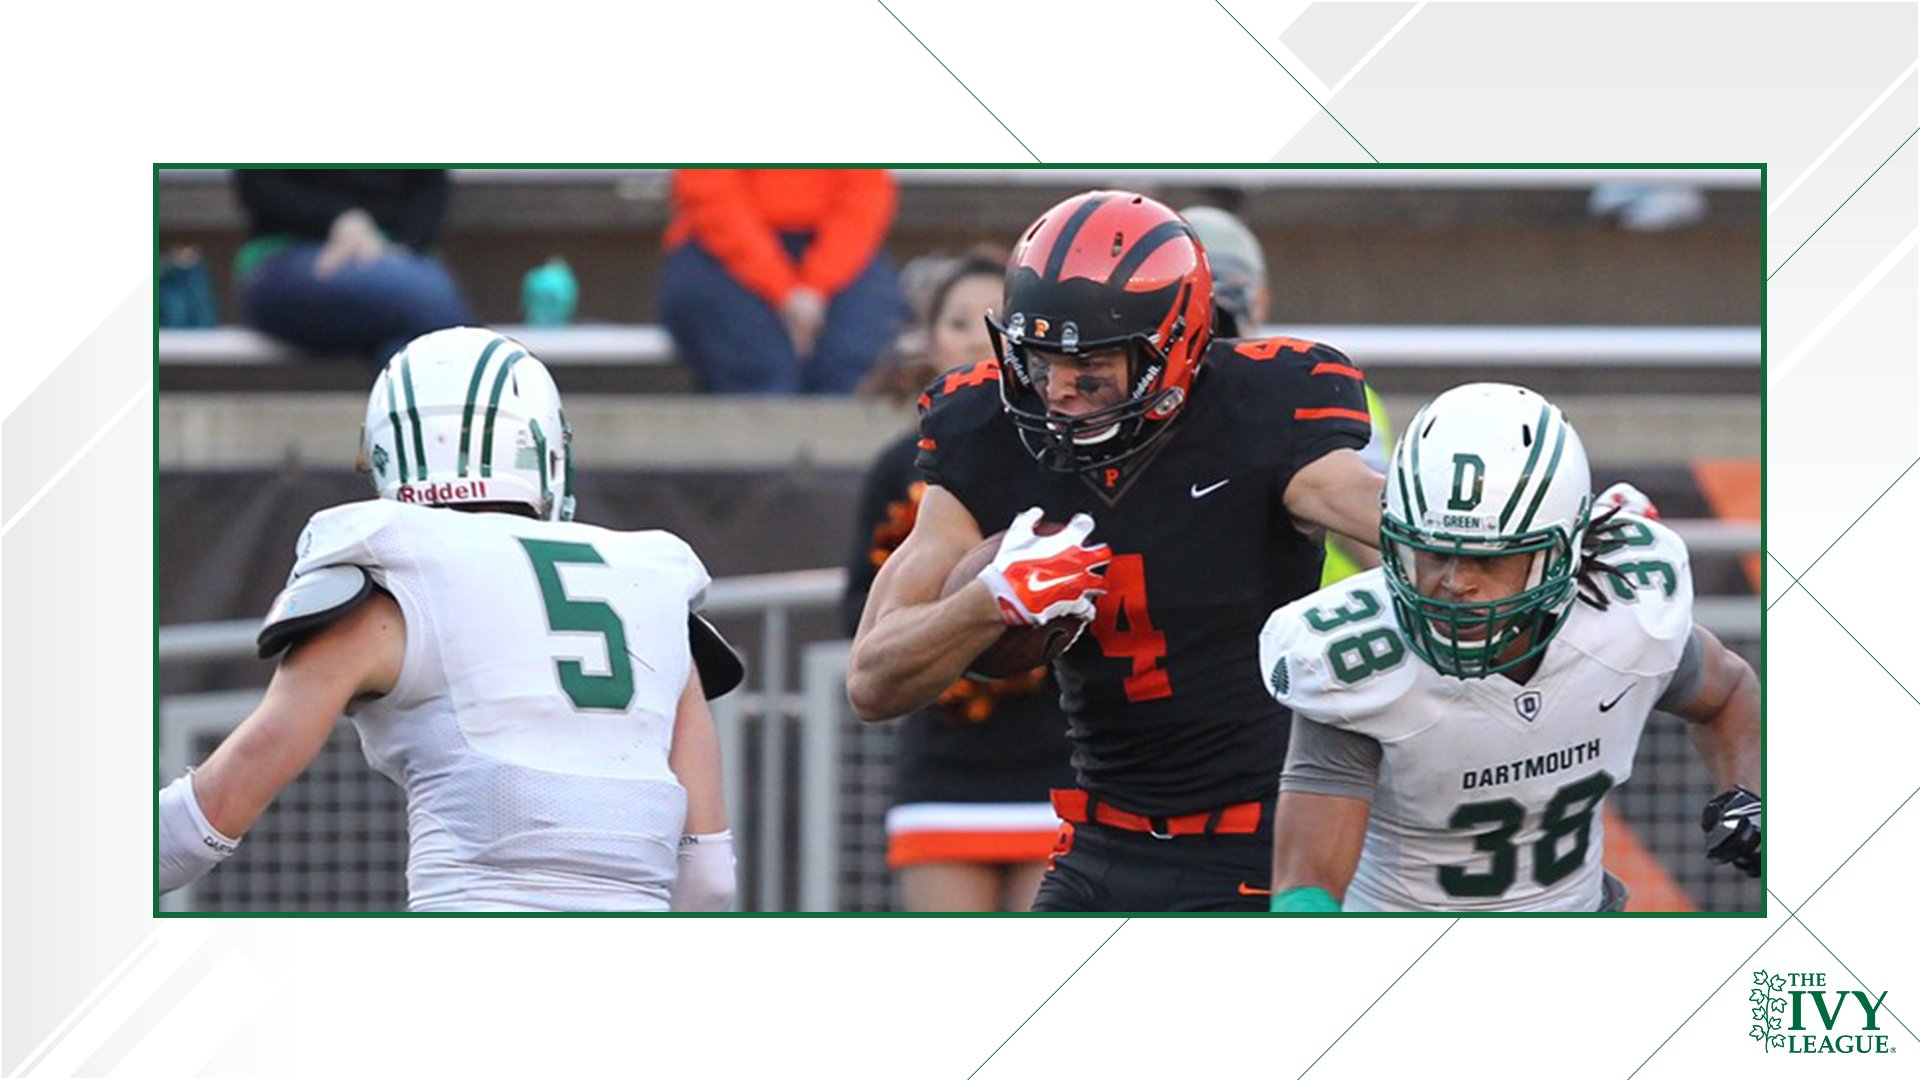 Physical Battle of FCS Unbeatens Ends With Princeton Topping Dartmouth 14-9